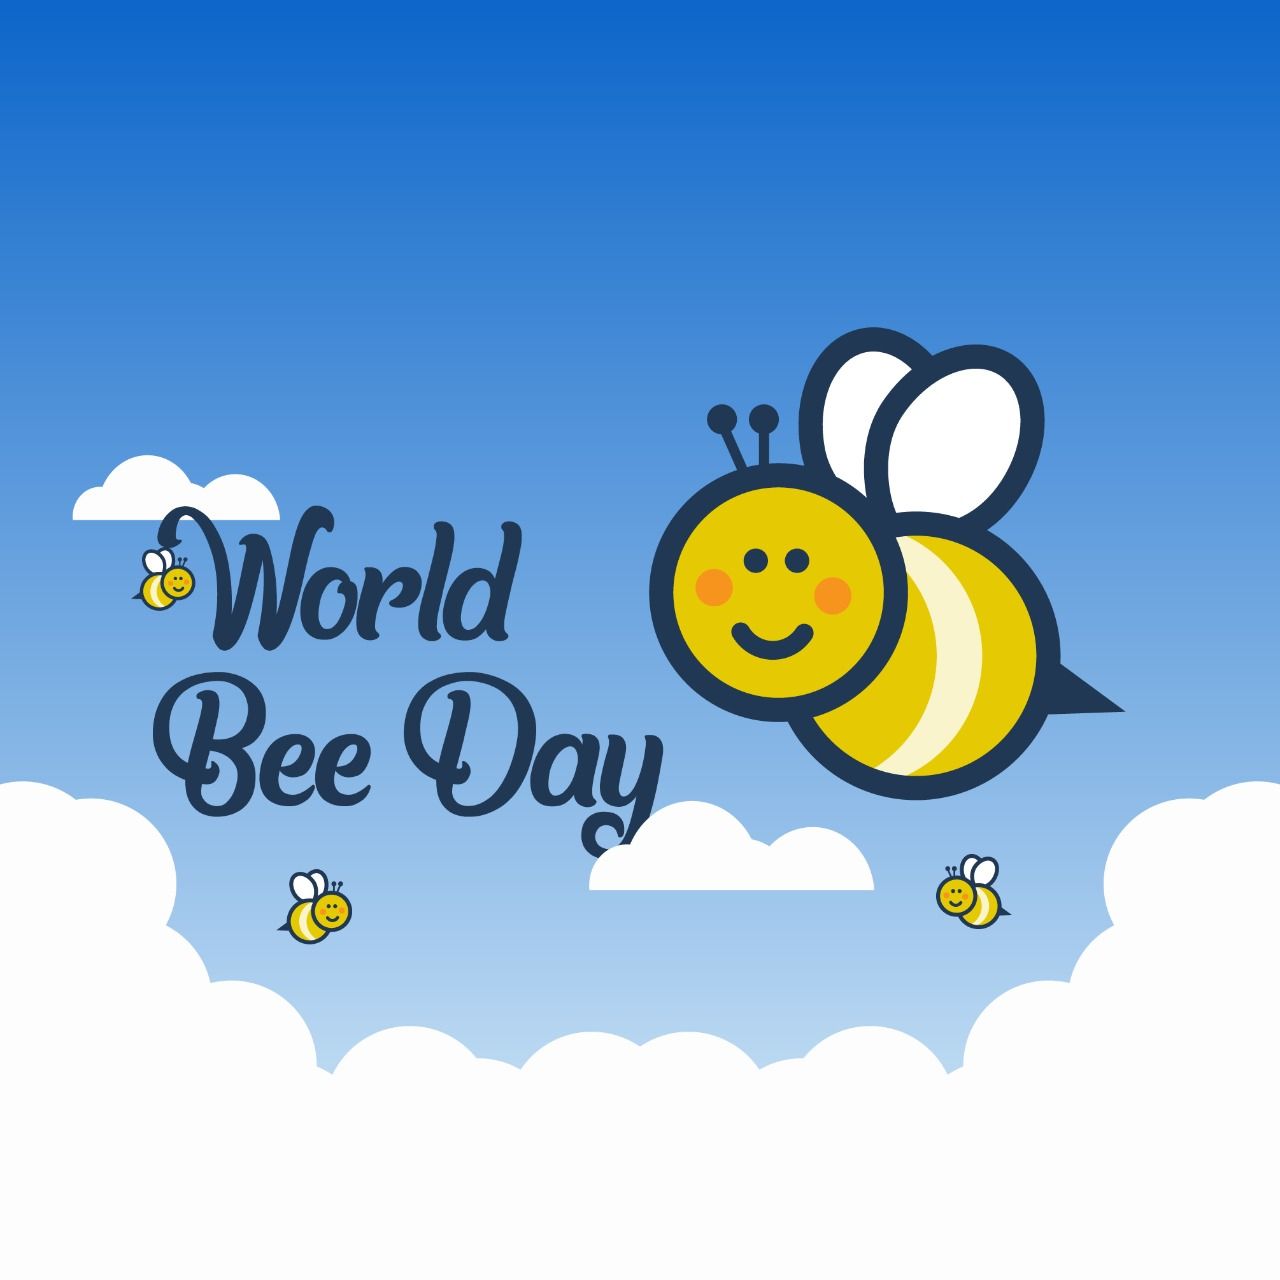 Happy World Bee Day 2020: HD Images, Wishes, Quotes, Sayings, Greetings